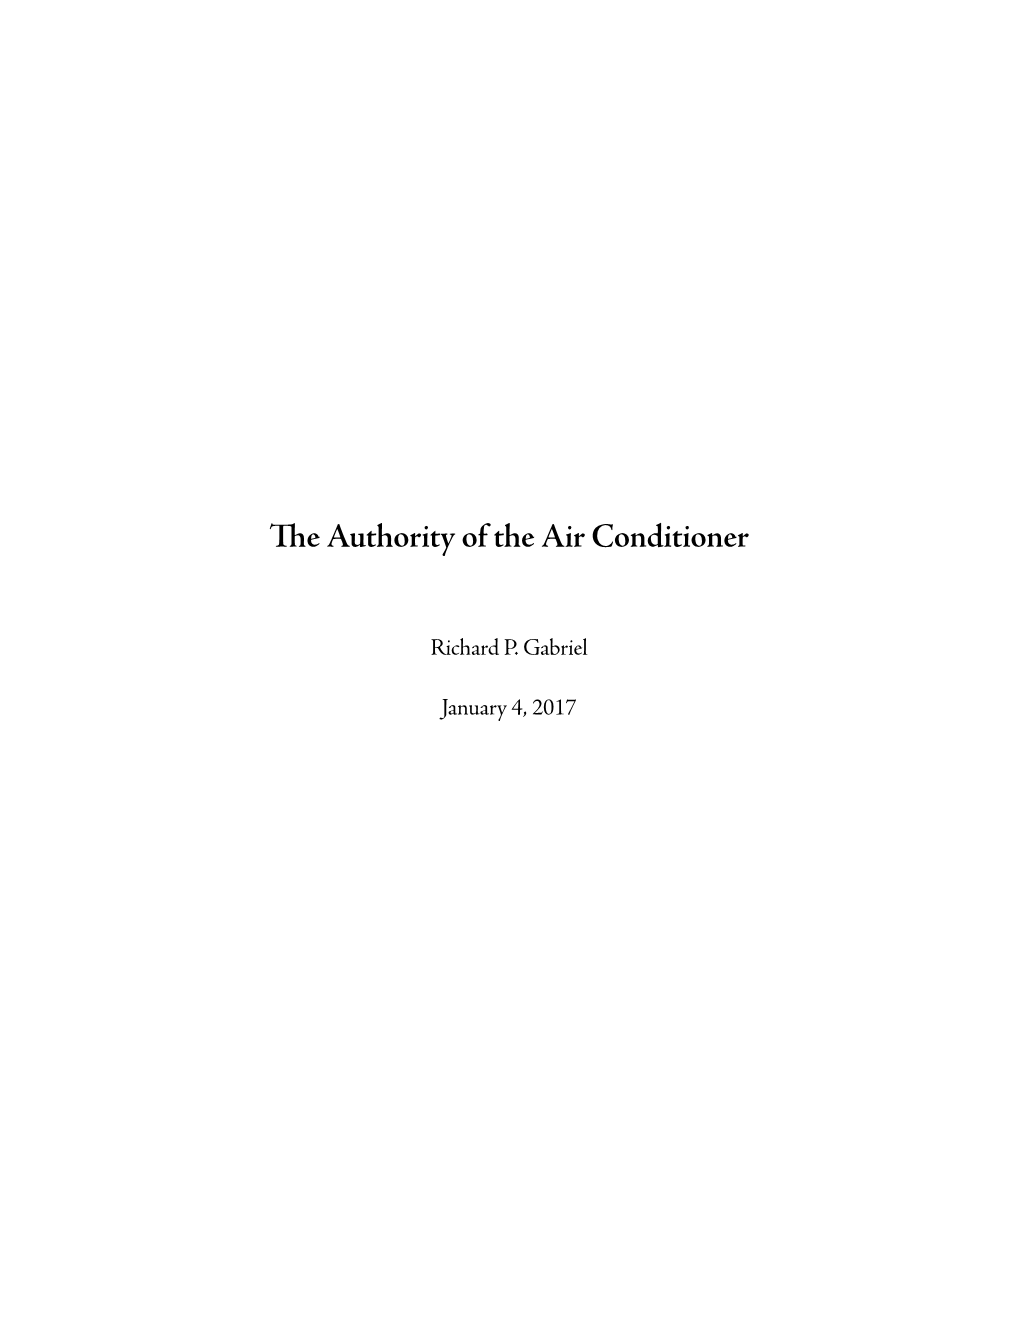 The Authority of the Air Conditioner